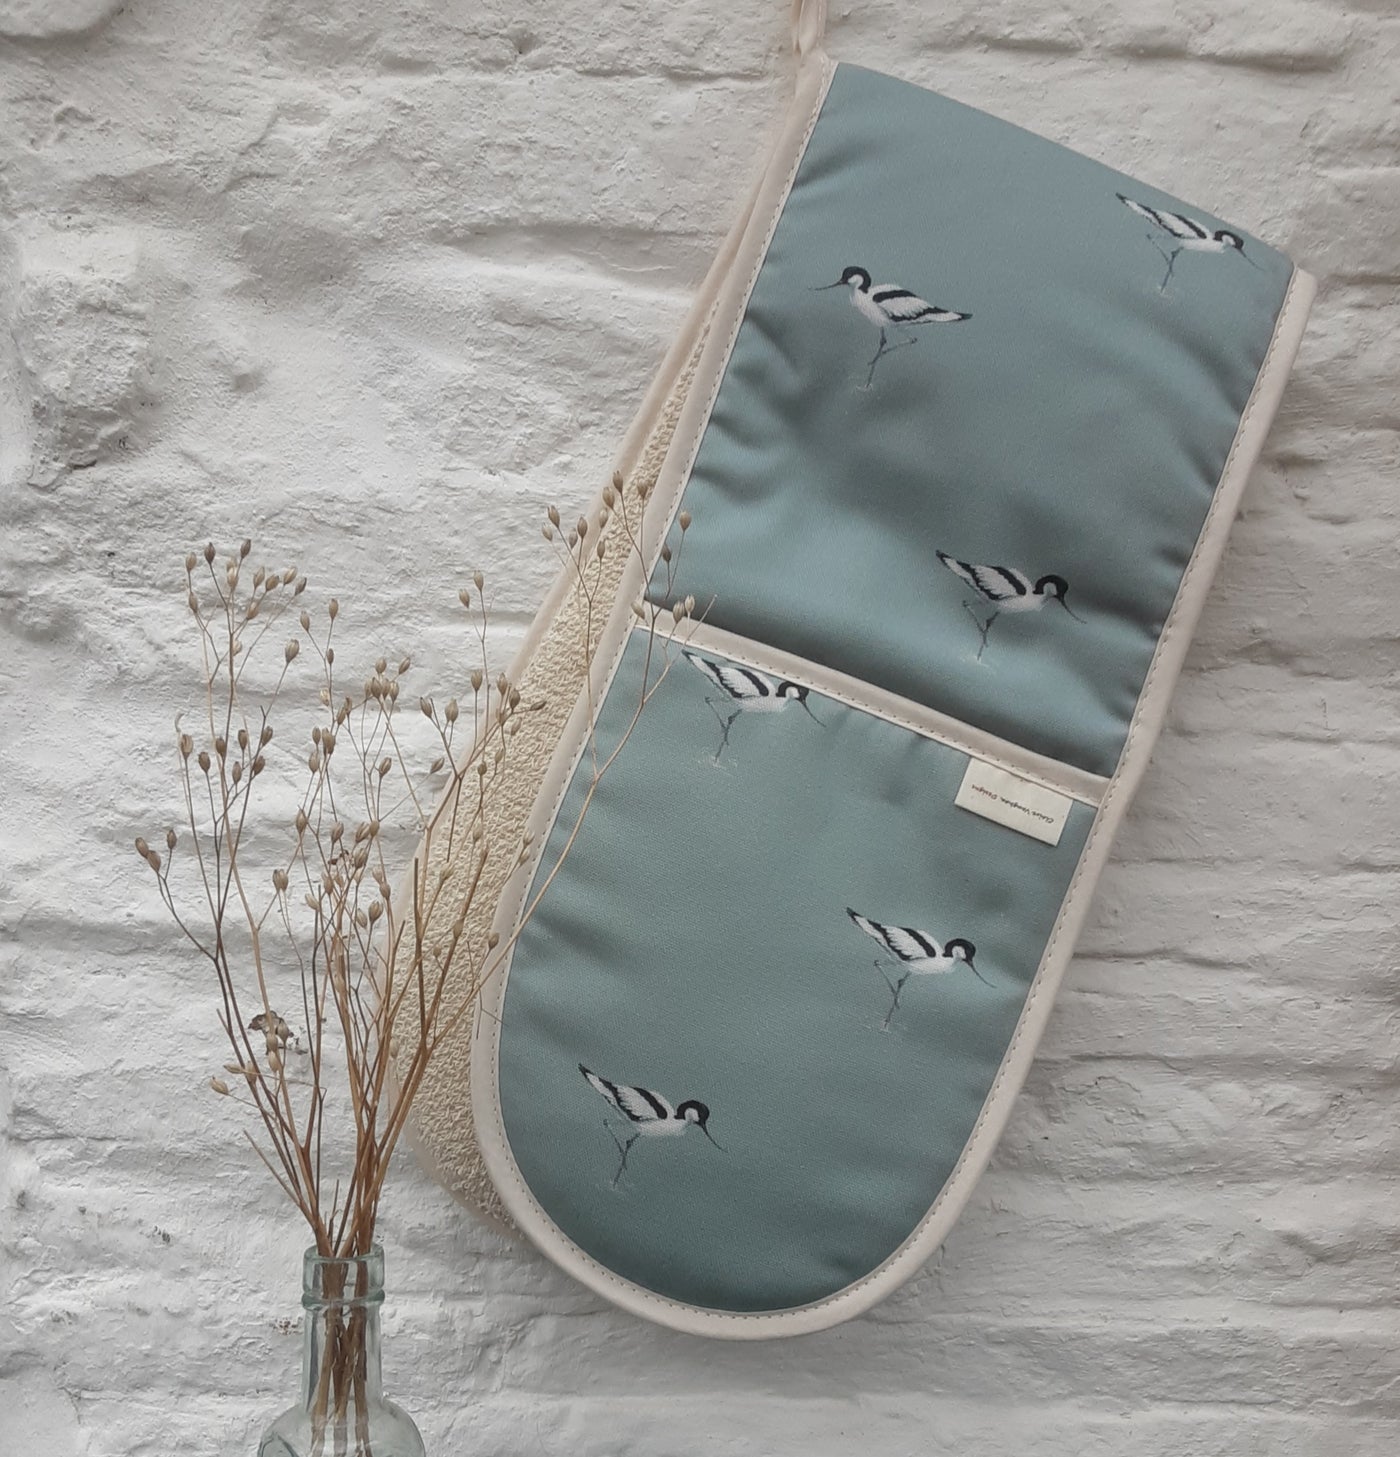 Cotton Oven Gloves in Avocets